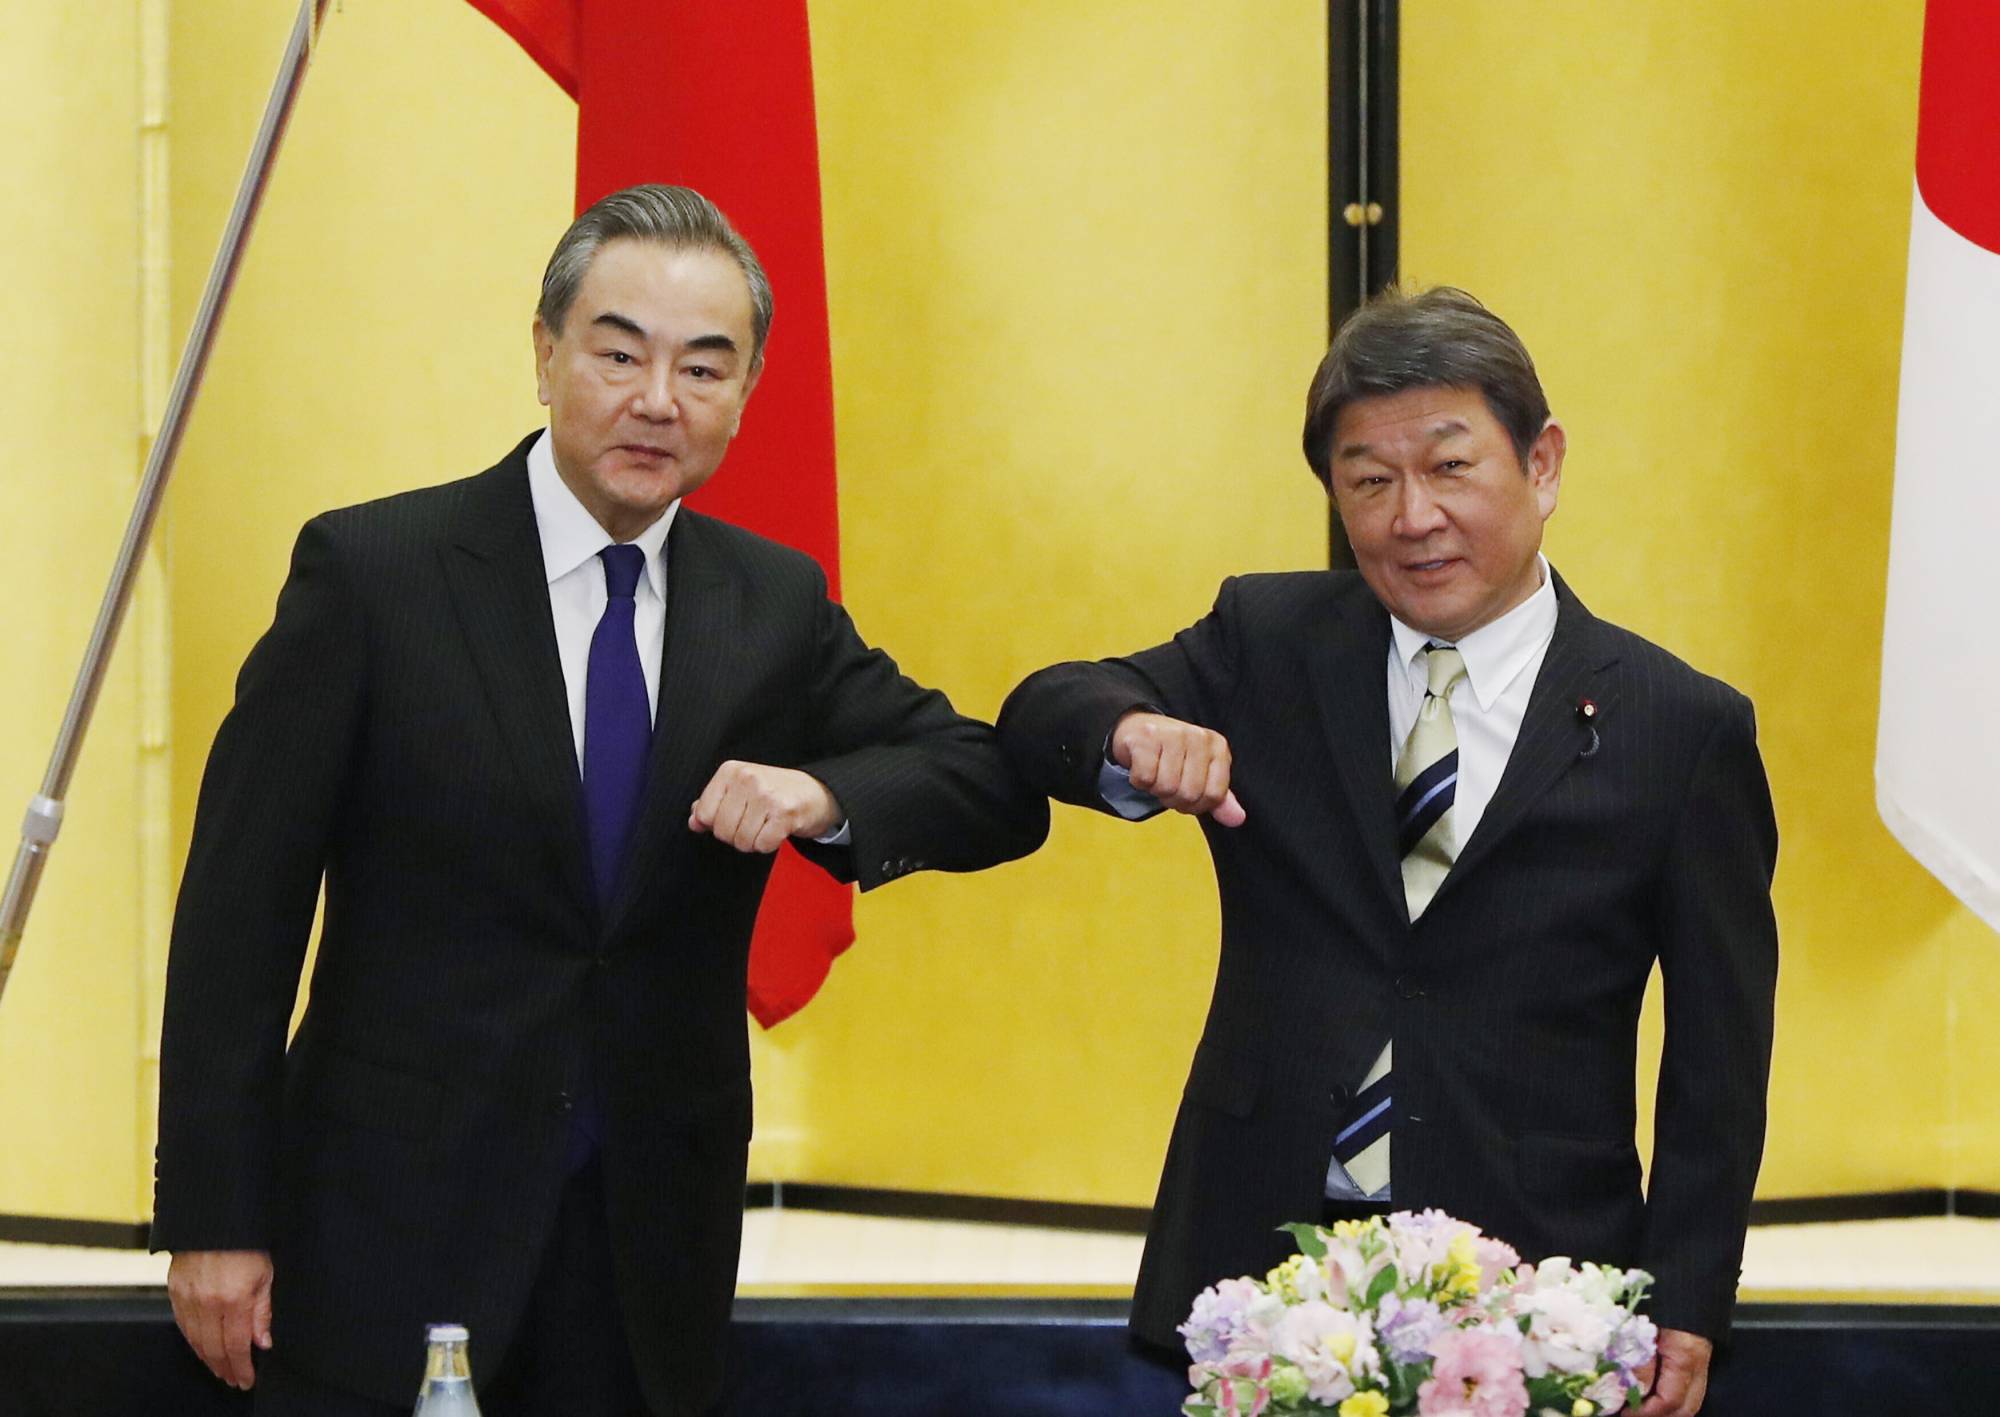 Chinese Foreign Minister Wang Yi (left) and his Japanese counterpart, Toshimitsu Motegi, bump elbows as they meet in Tokyo on Tuesday. | POOL / VIA AP